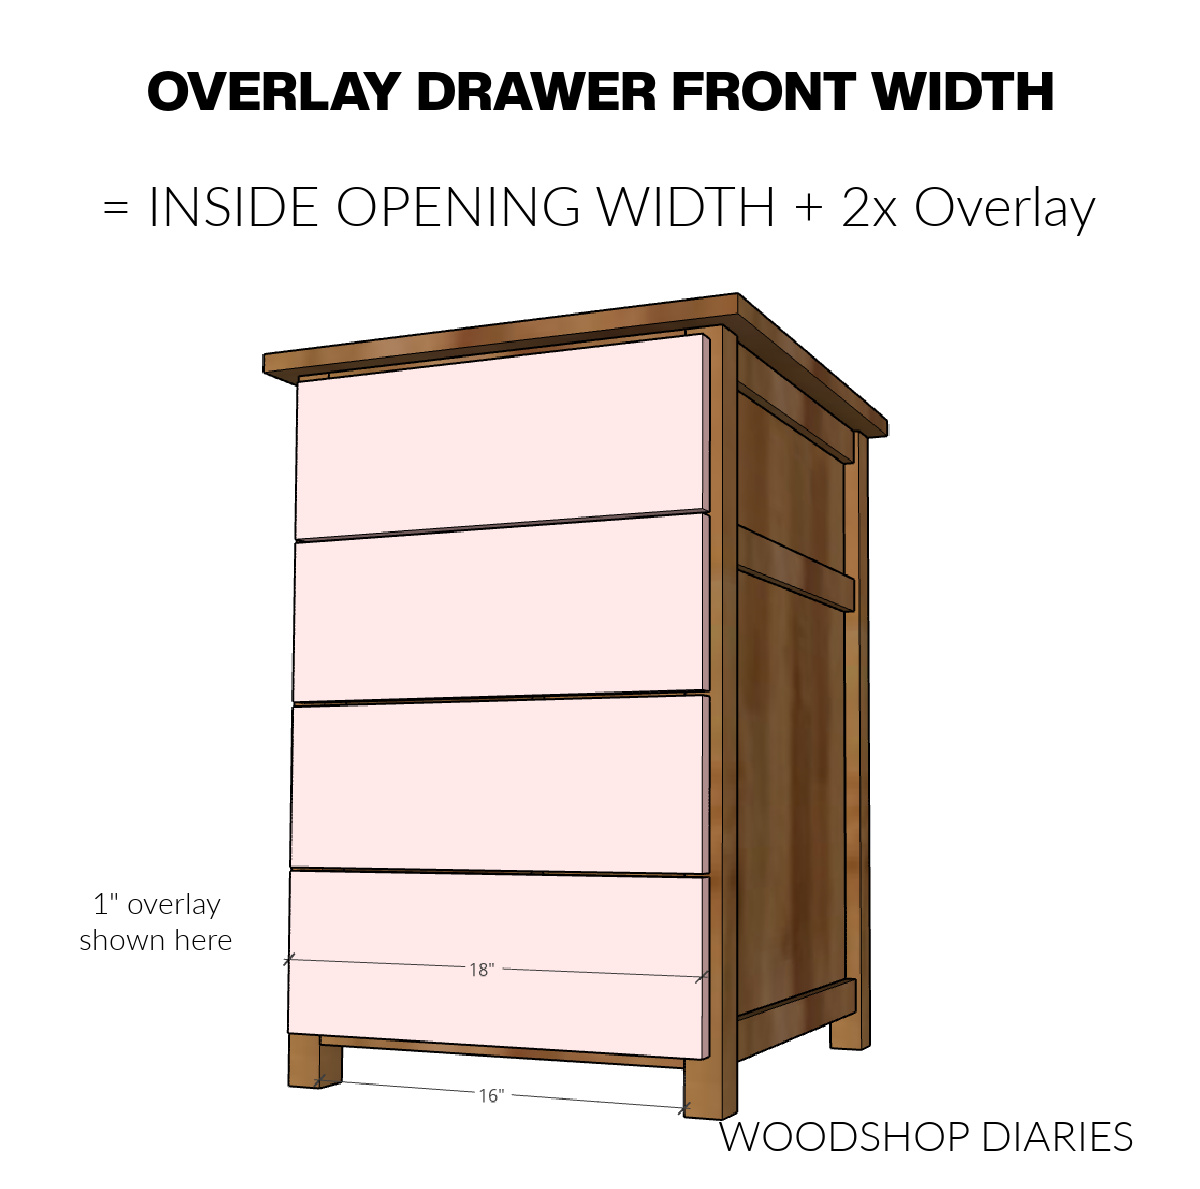 Computer diagram showing drawer front width for overlay drawers